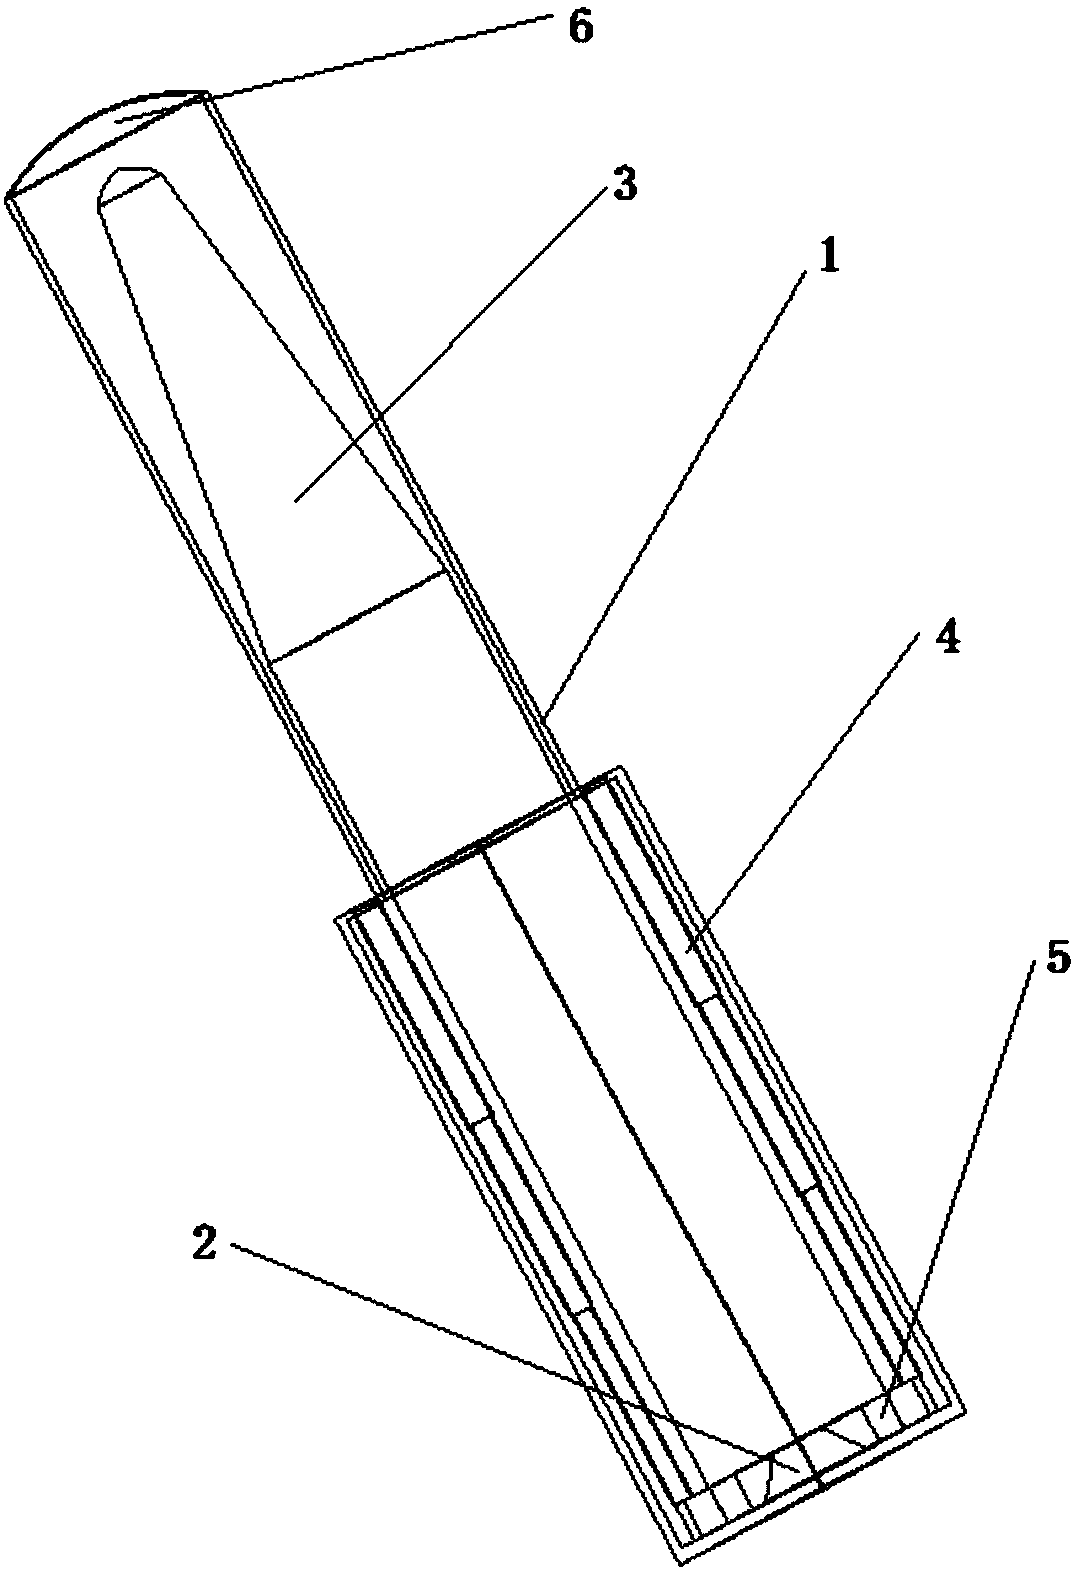 Self-pushing launching device for improving initial volume of low pressure chamber